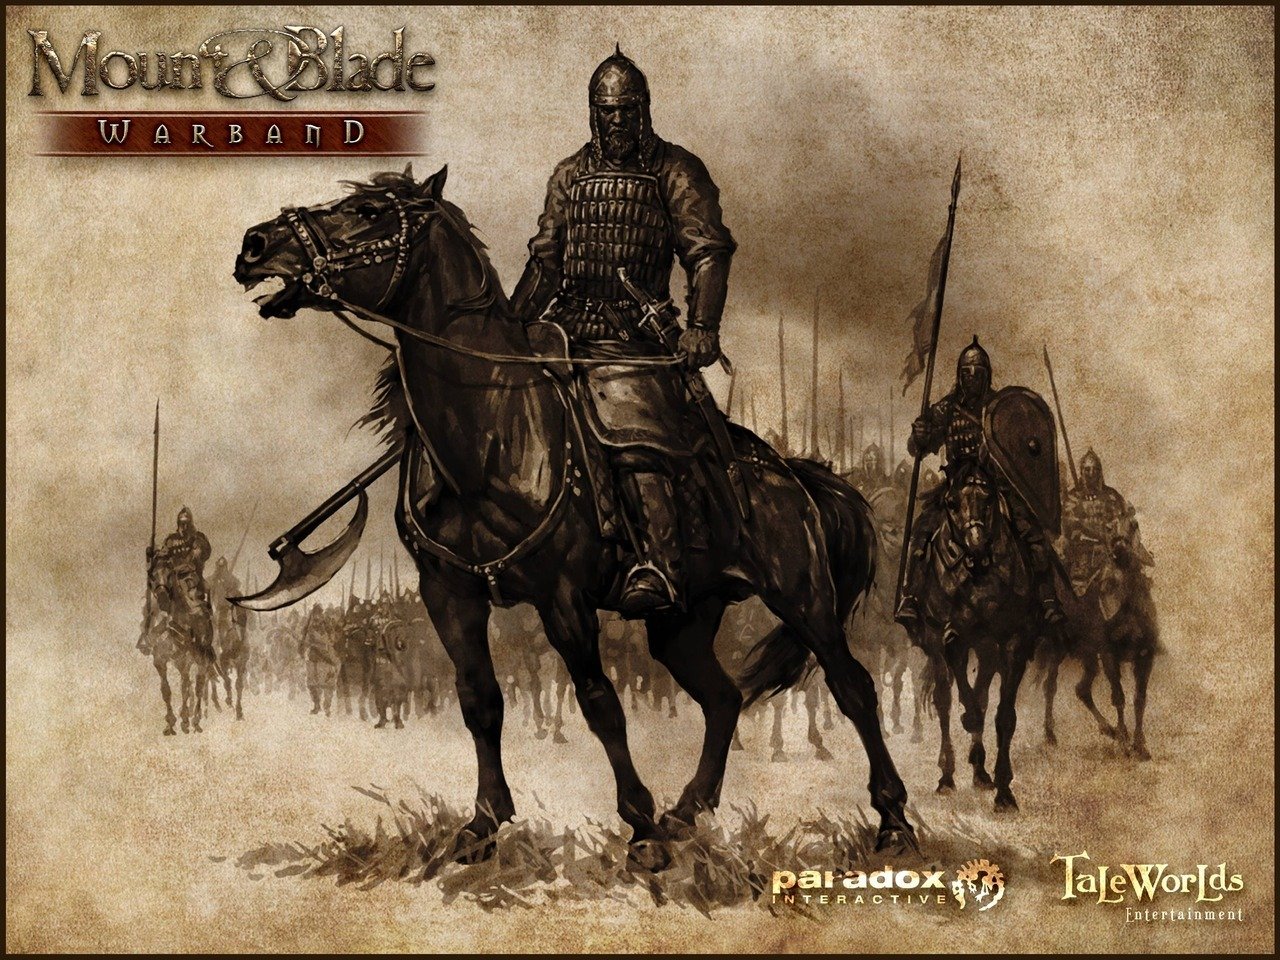 http://image.jeuxvideo.com/images/pc/m/o/mount-blade-warband-pc-026.jpg